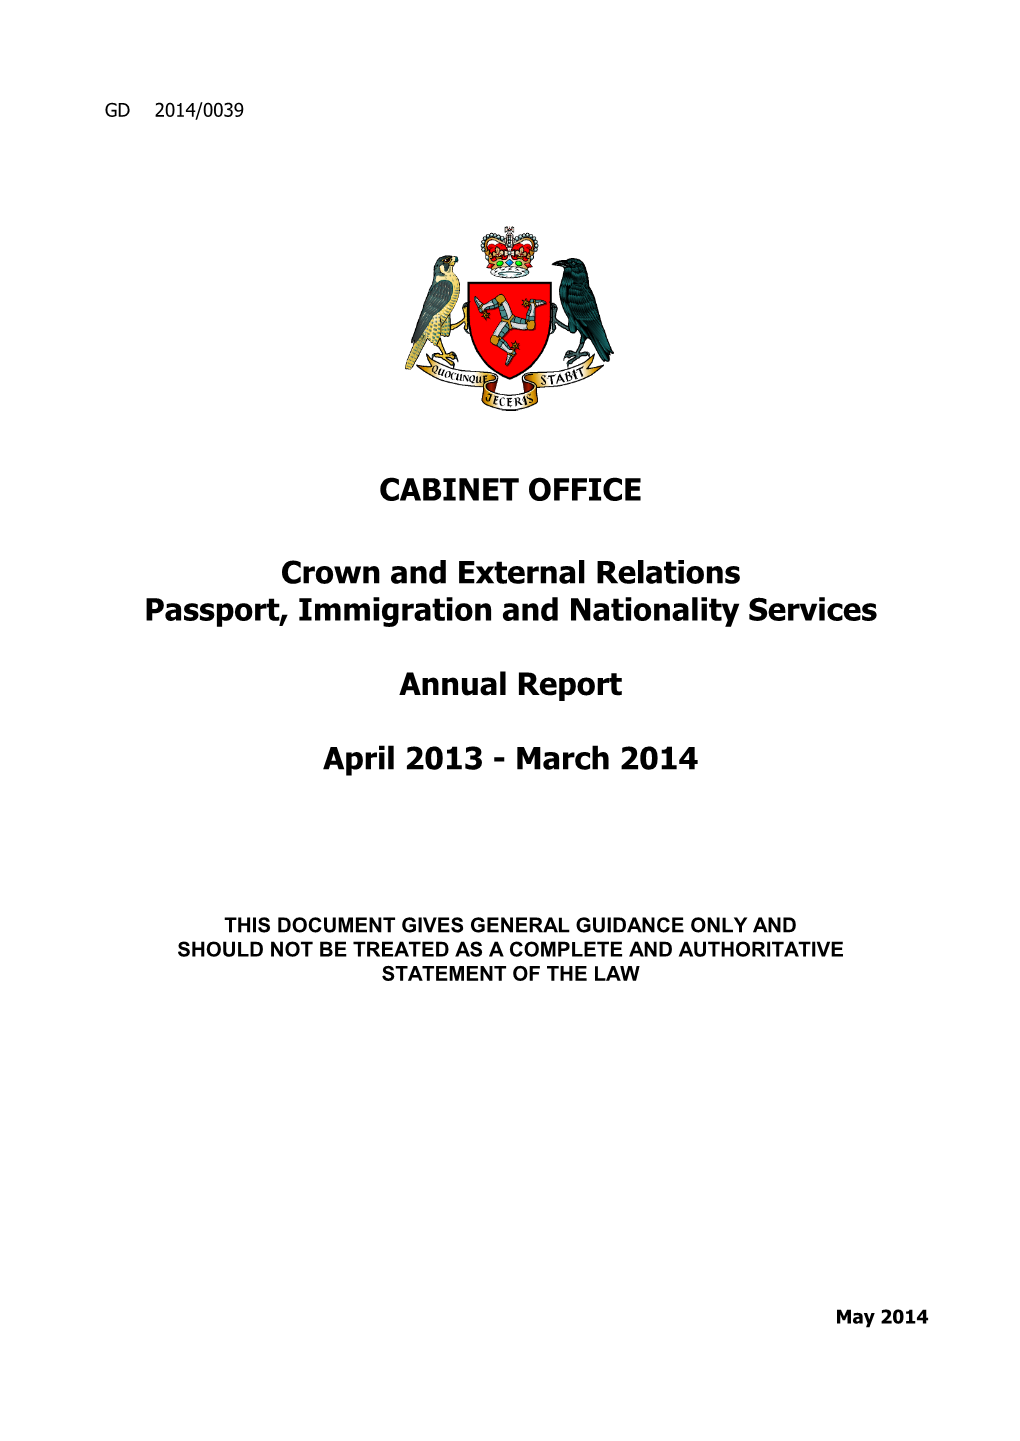 CABINET OFFICE Crown and External Relations Passport